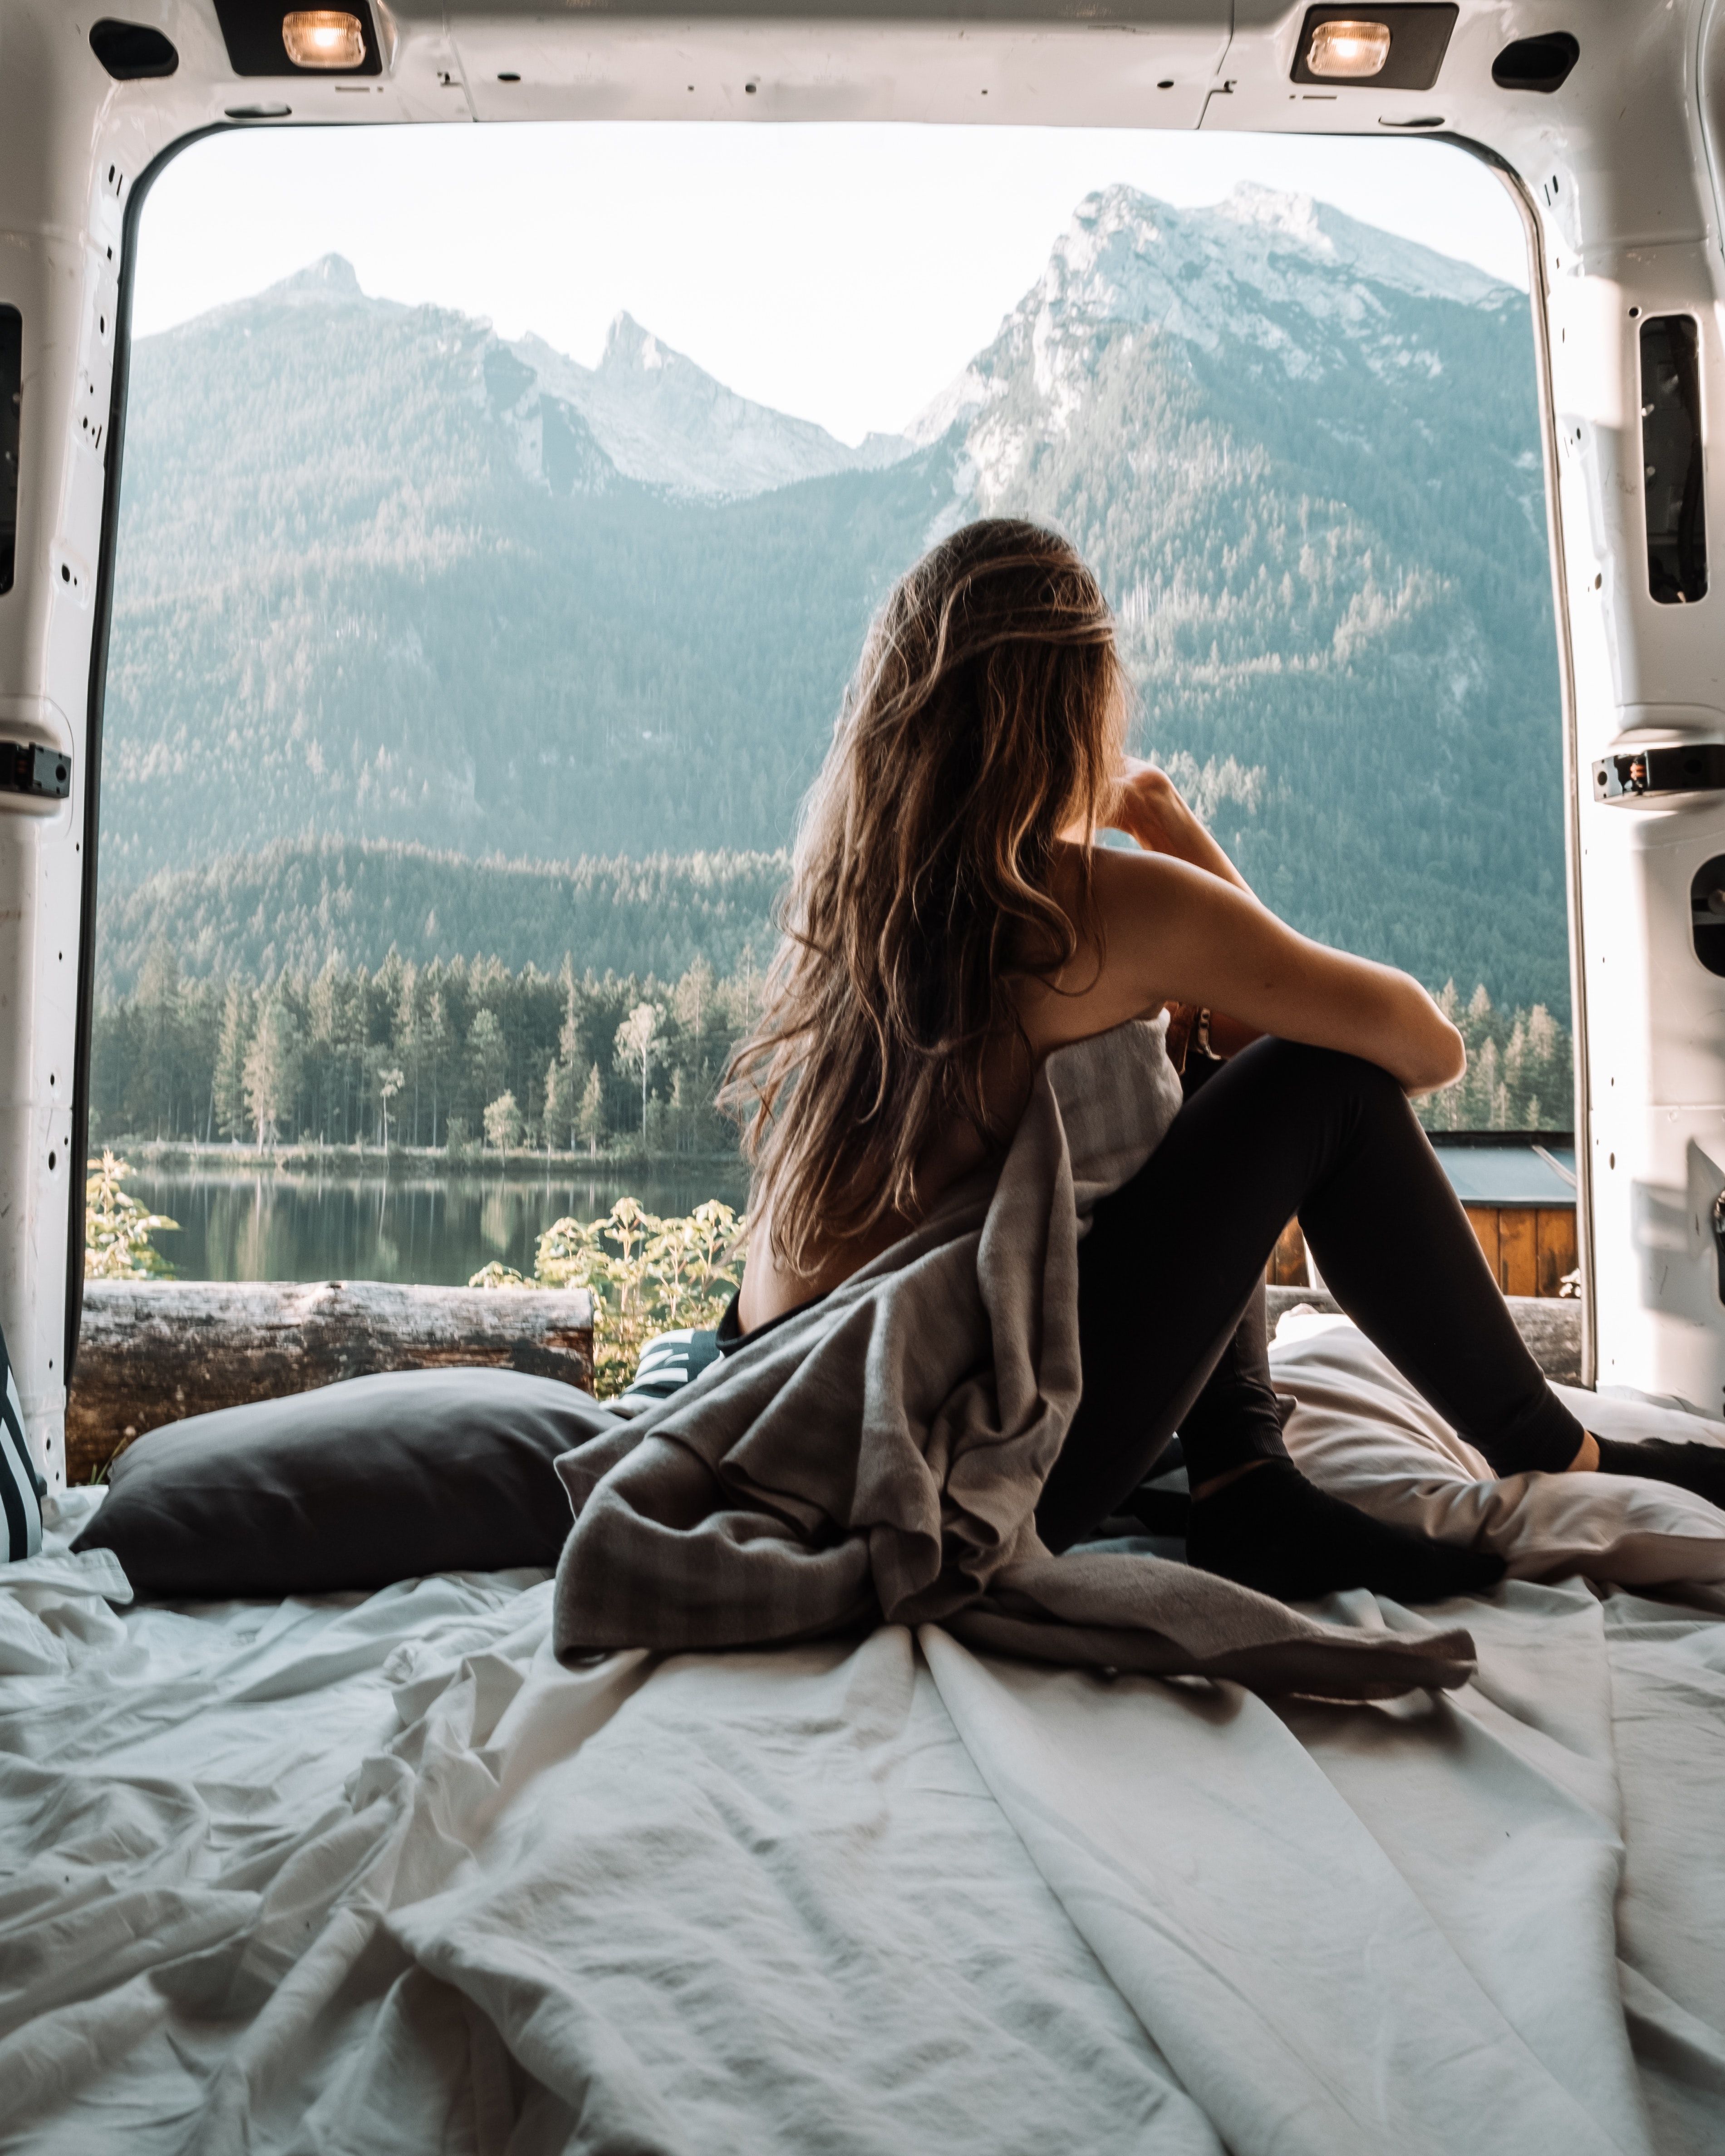 A woman sits on the bed of a van looking out at a mountain. - Travel